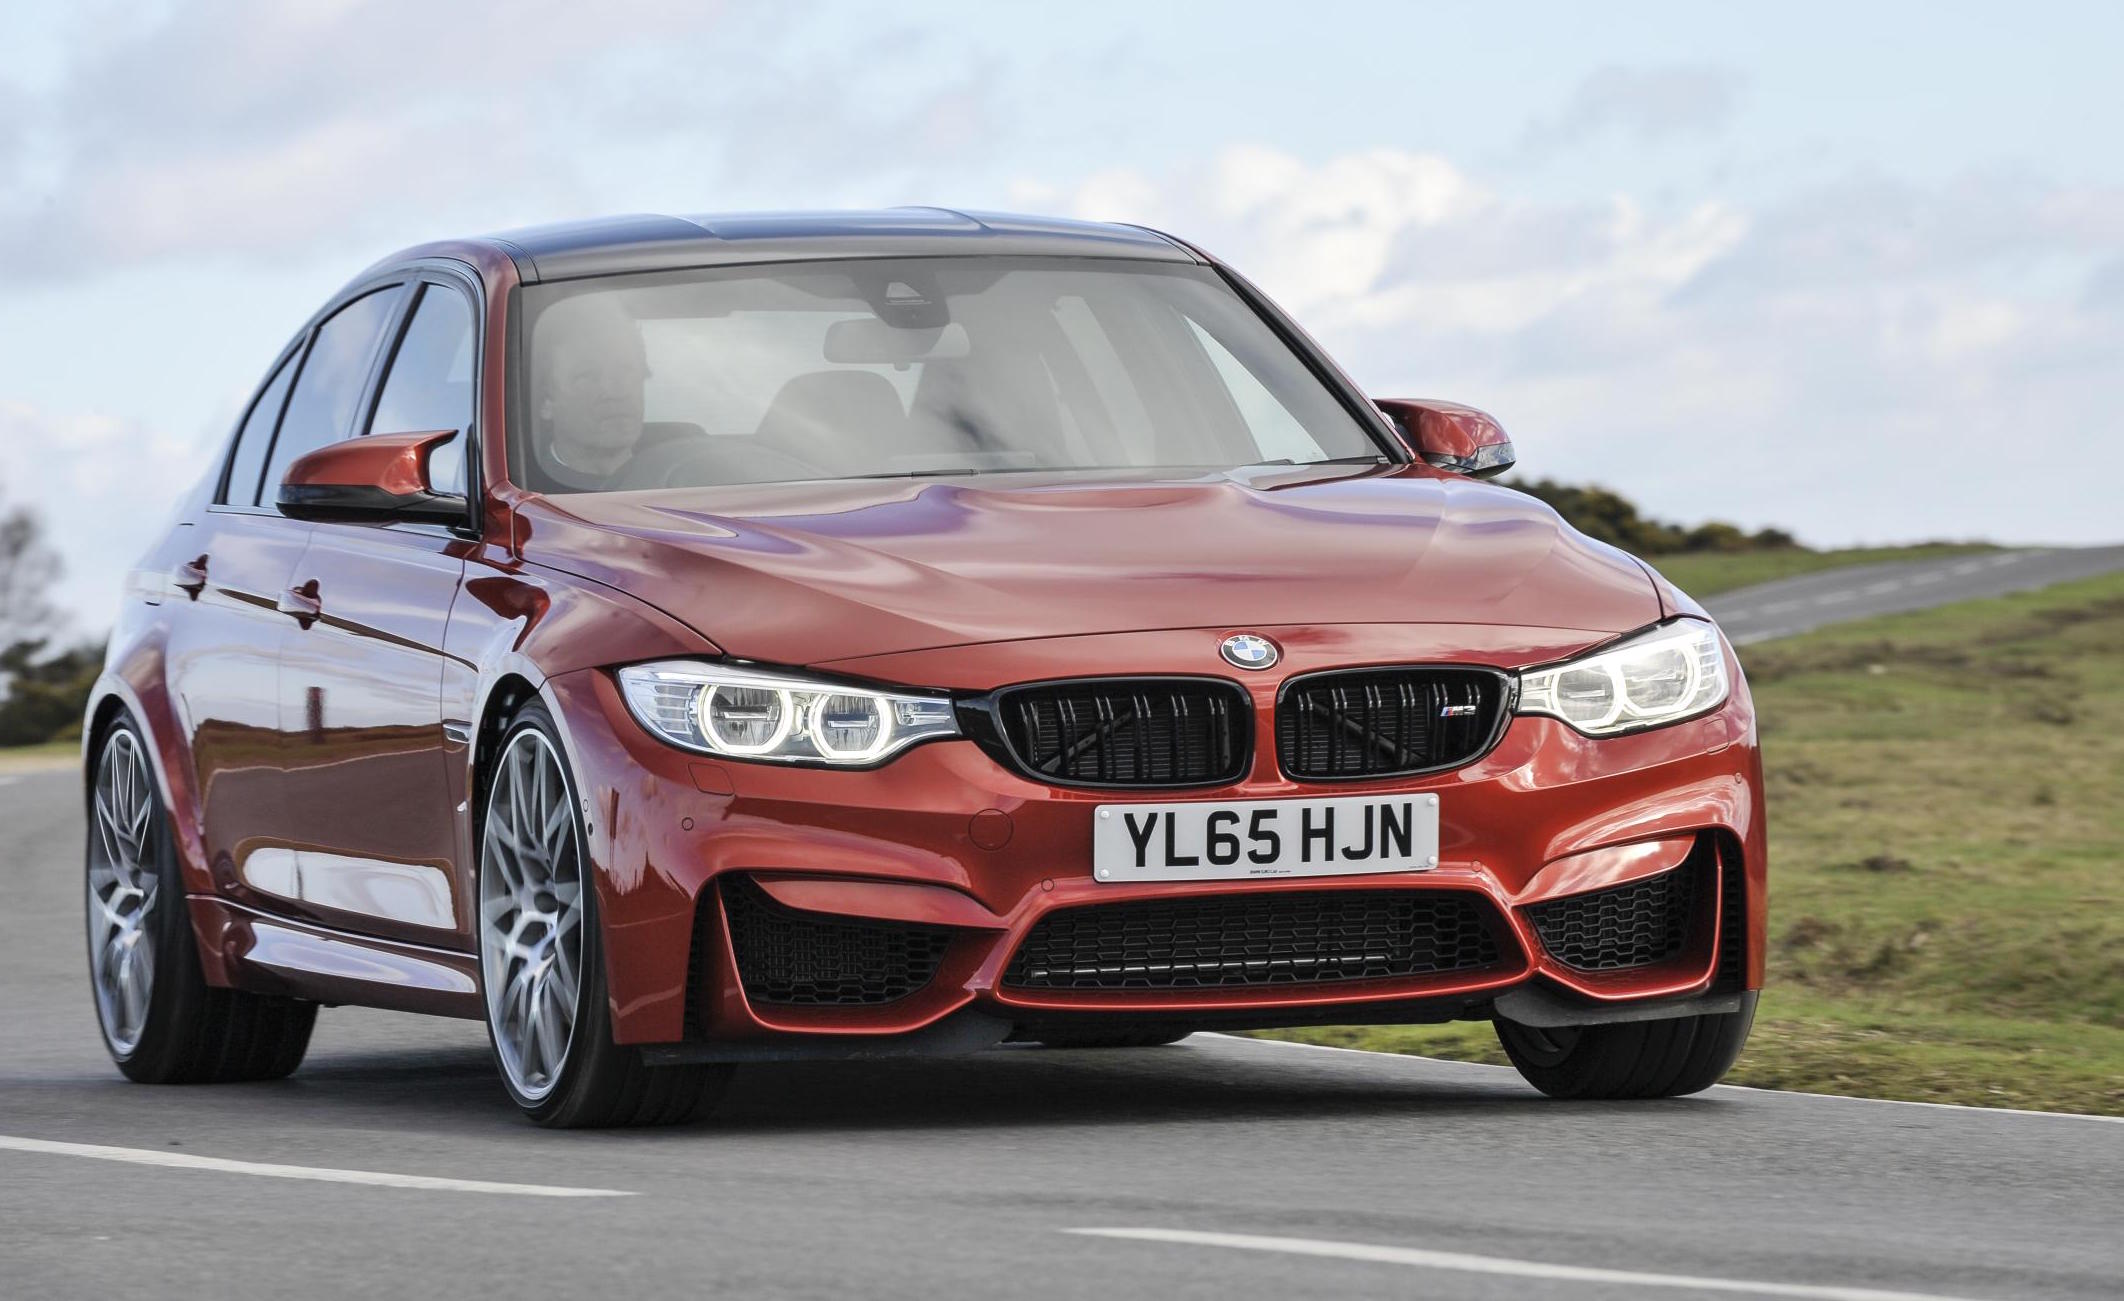 2020 BMW M3 powertrain confirmed; up to 375kW, AWD & manual options